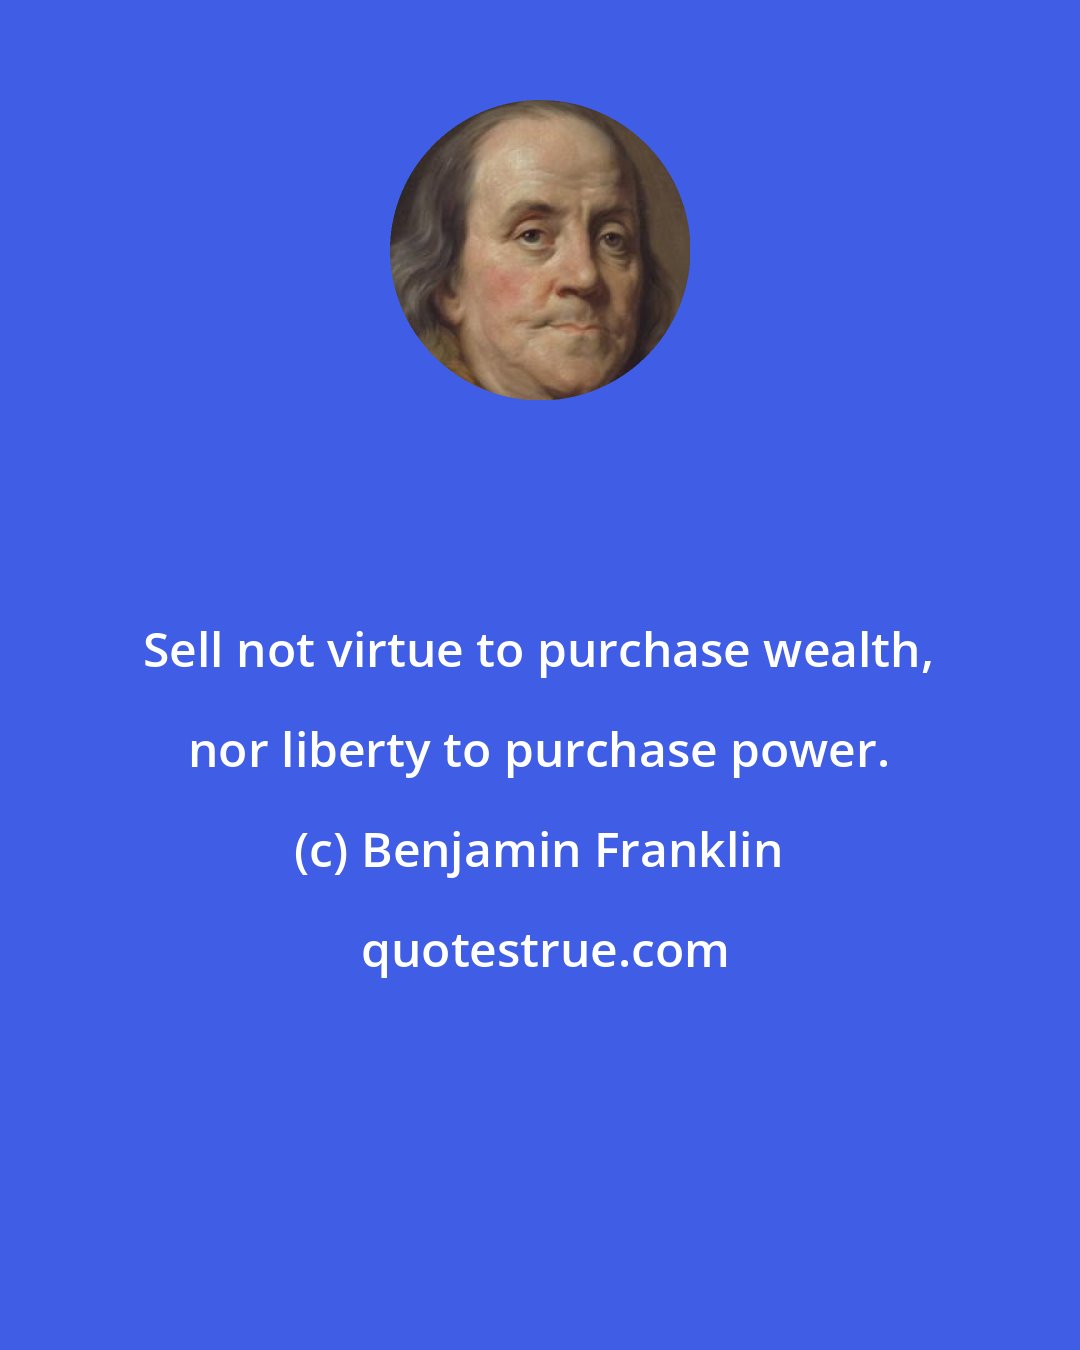 Benjamin Franklin: Sell not virtue to purchase wealth, nor liberty to purchase power.